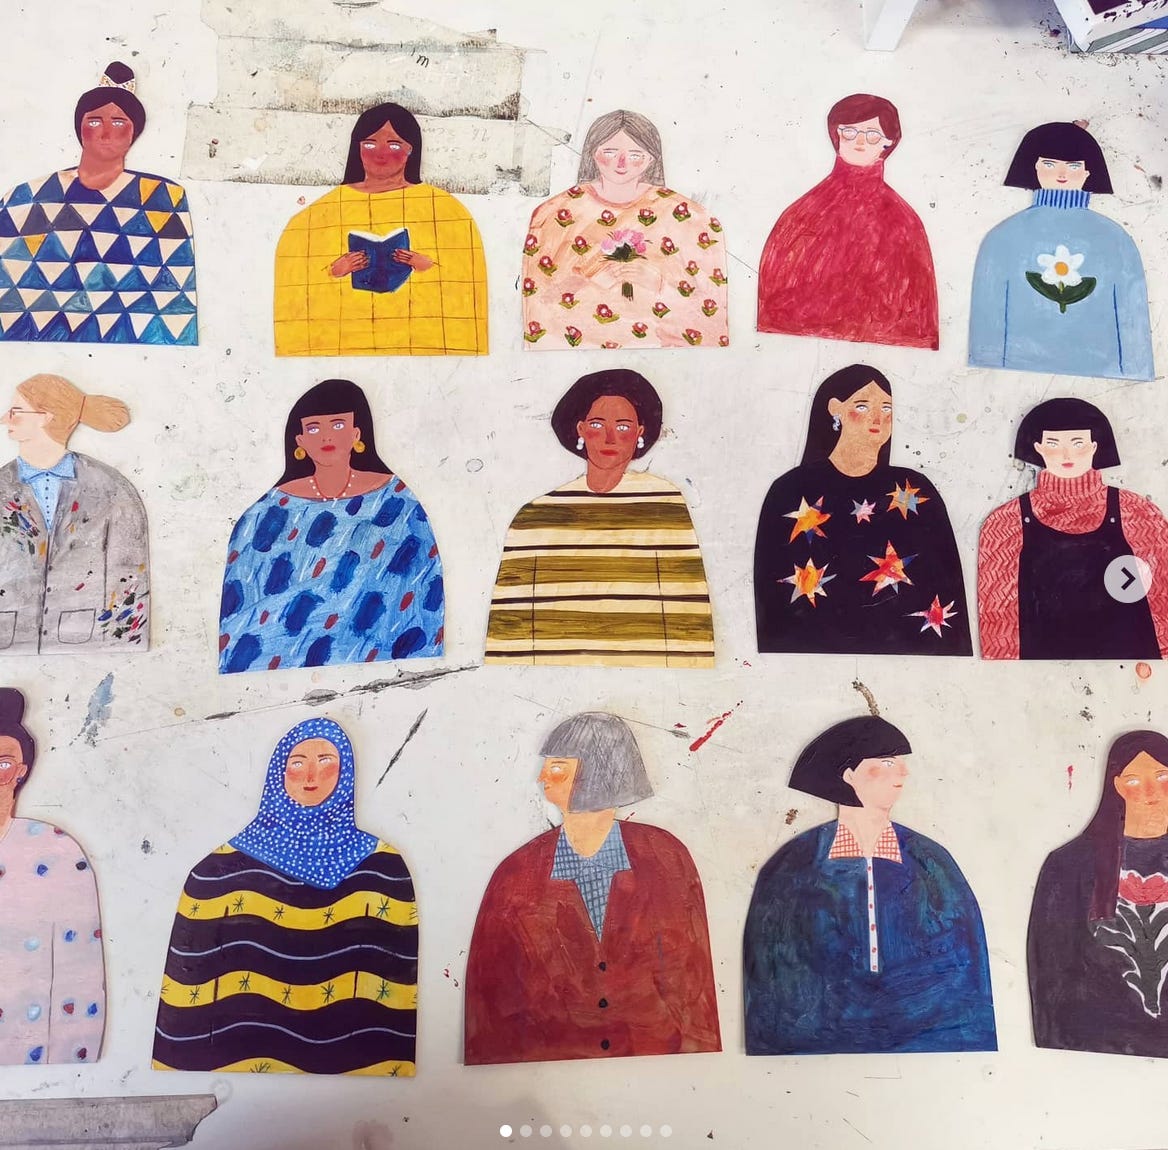 fifteen cardboard women, painted in different colourful outfits. 